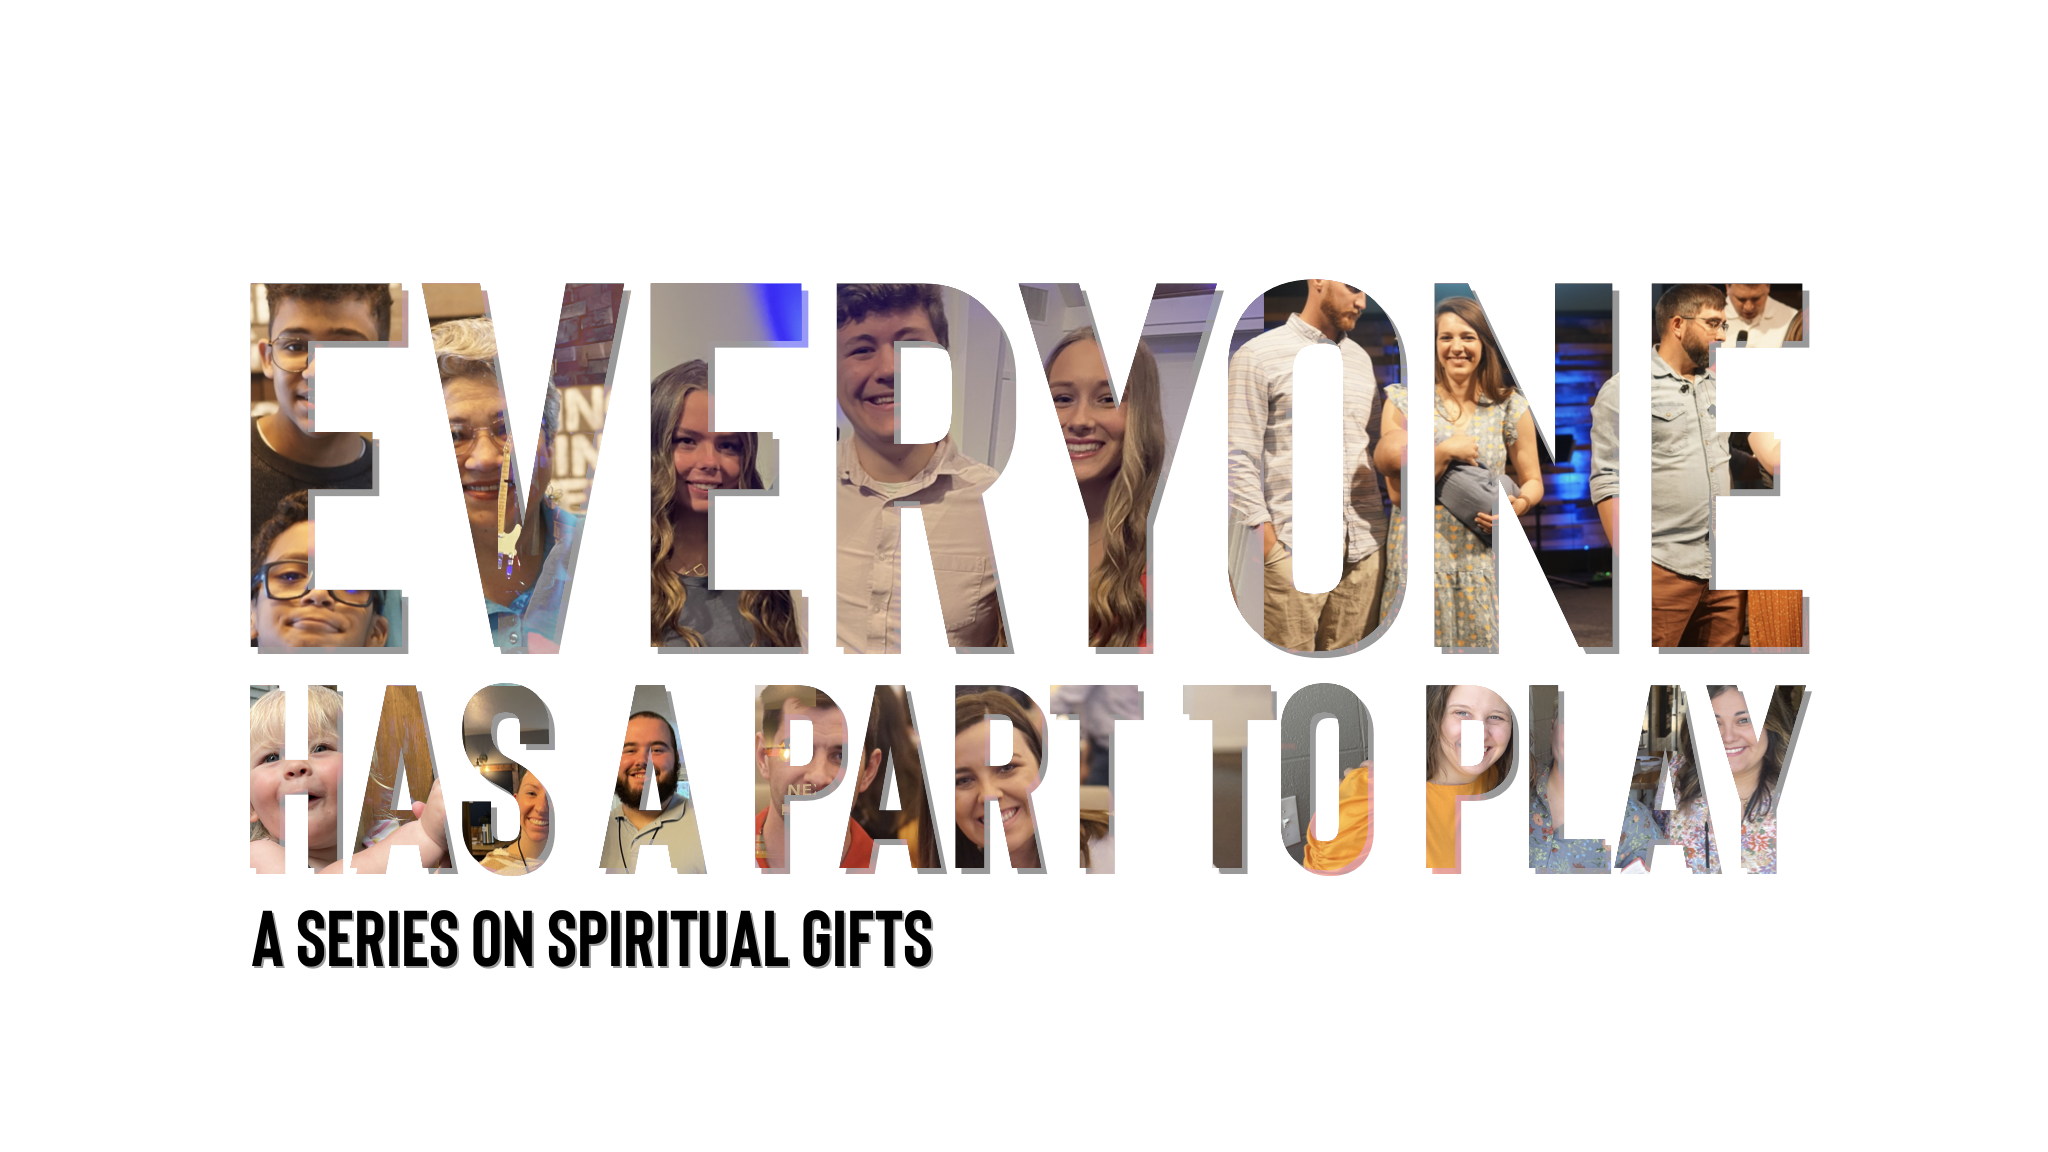 We All Have A Part To Play | Series on Spiritual Gifts